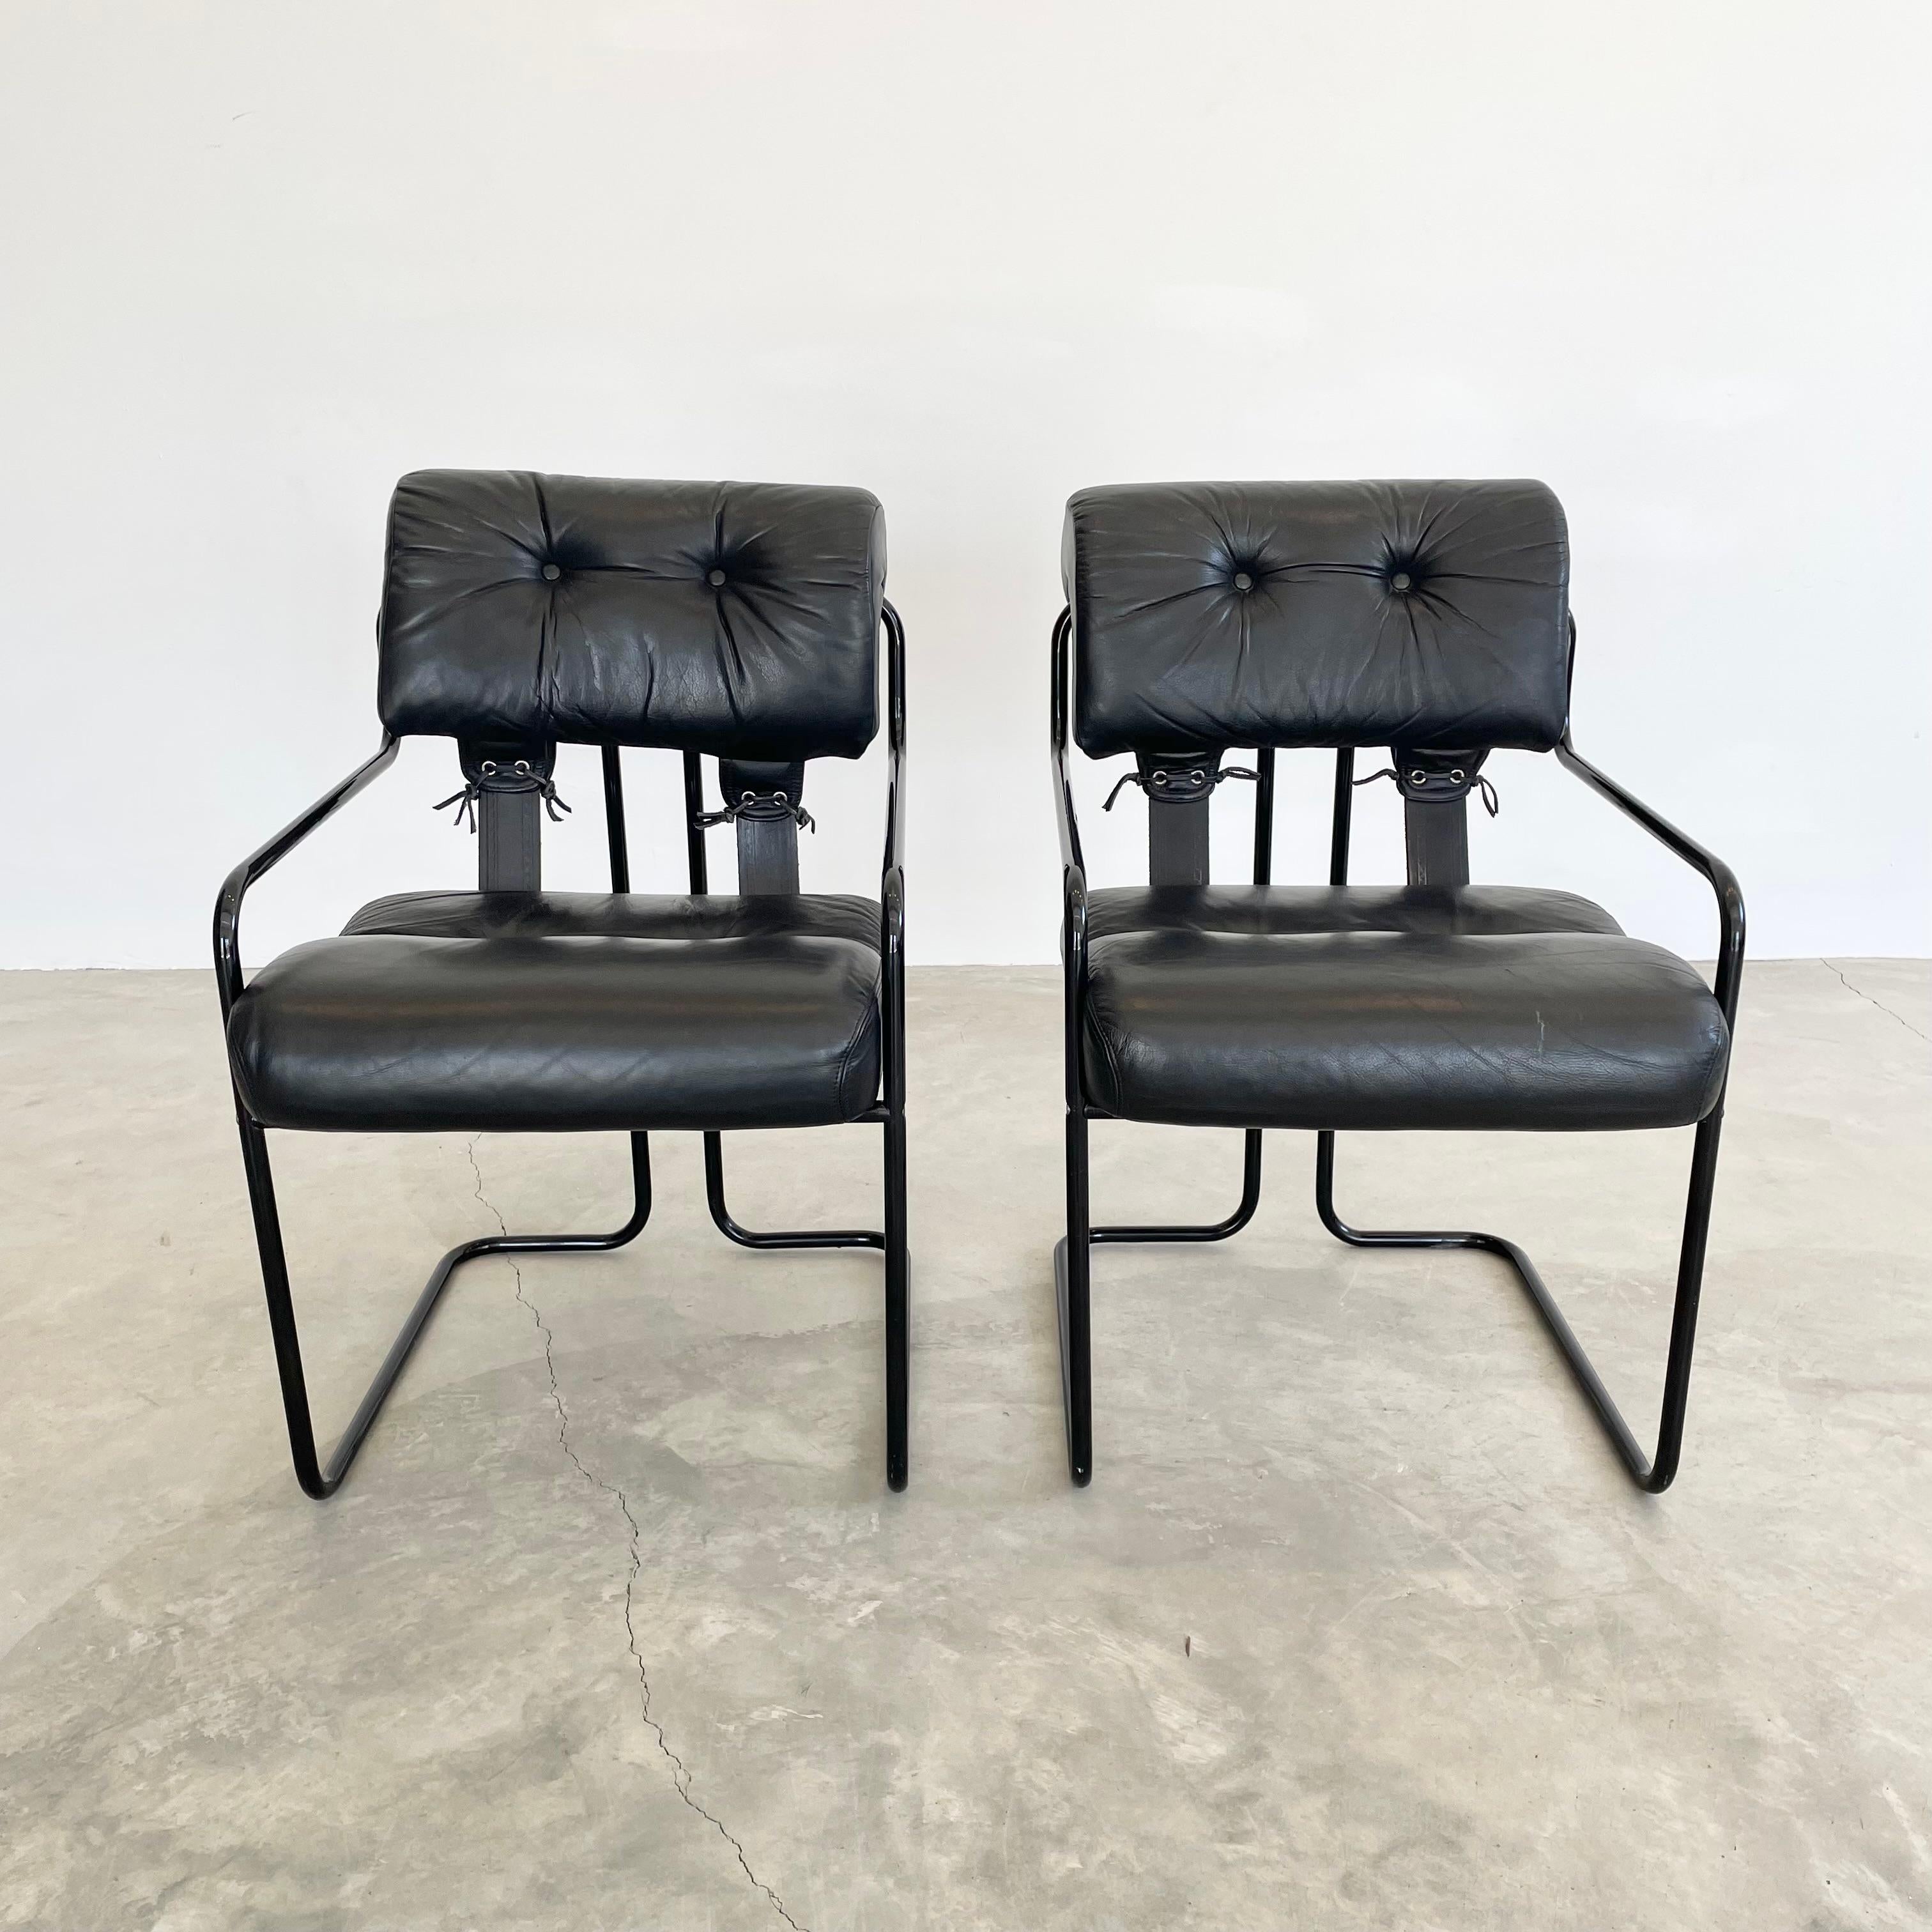 Handsome Tucroma dining chair by Guido Faleschini for Mariani. Distributed by Pace in New York. Great original leather in black along with the iconic metal tube frame in solid black as well giving this chair a nice depth and presence. Great for a